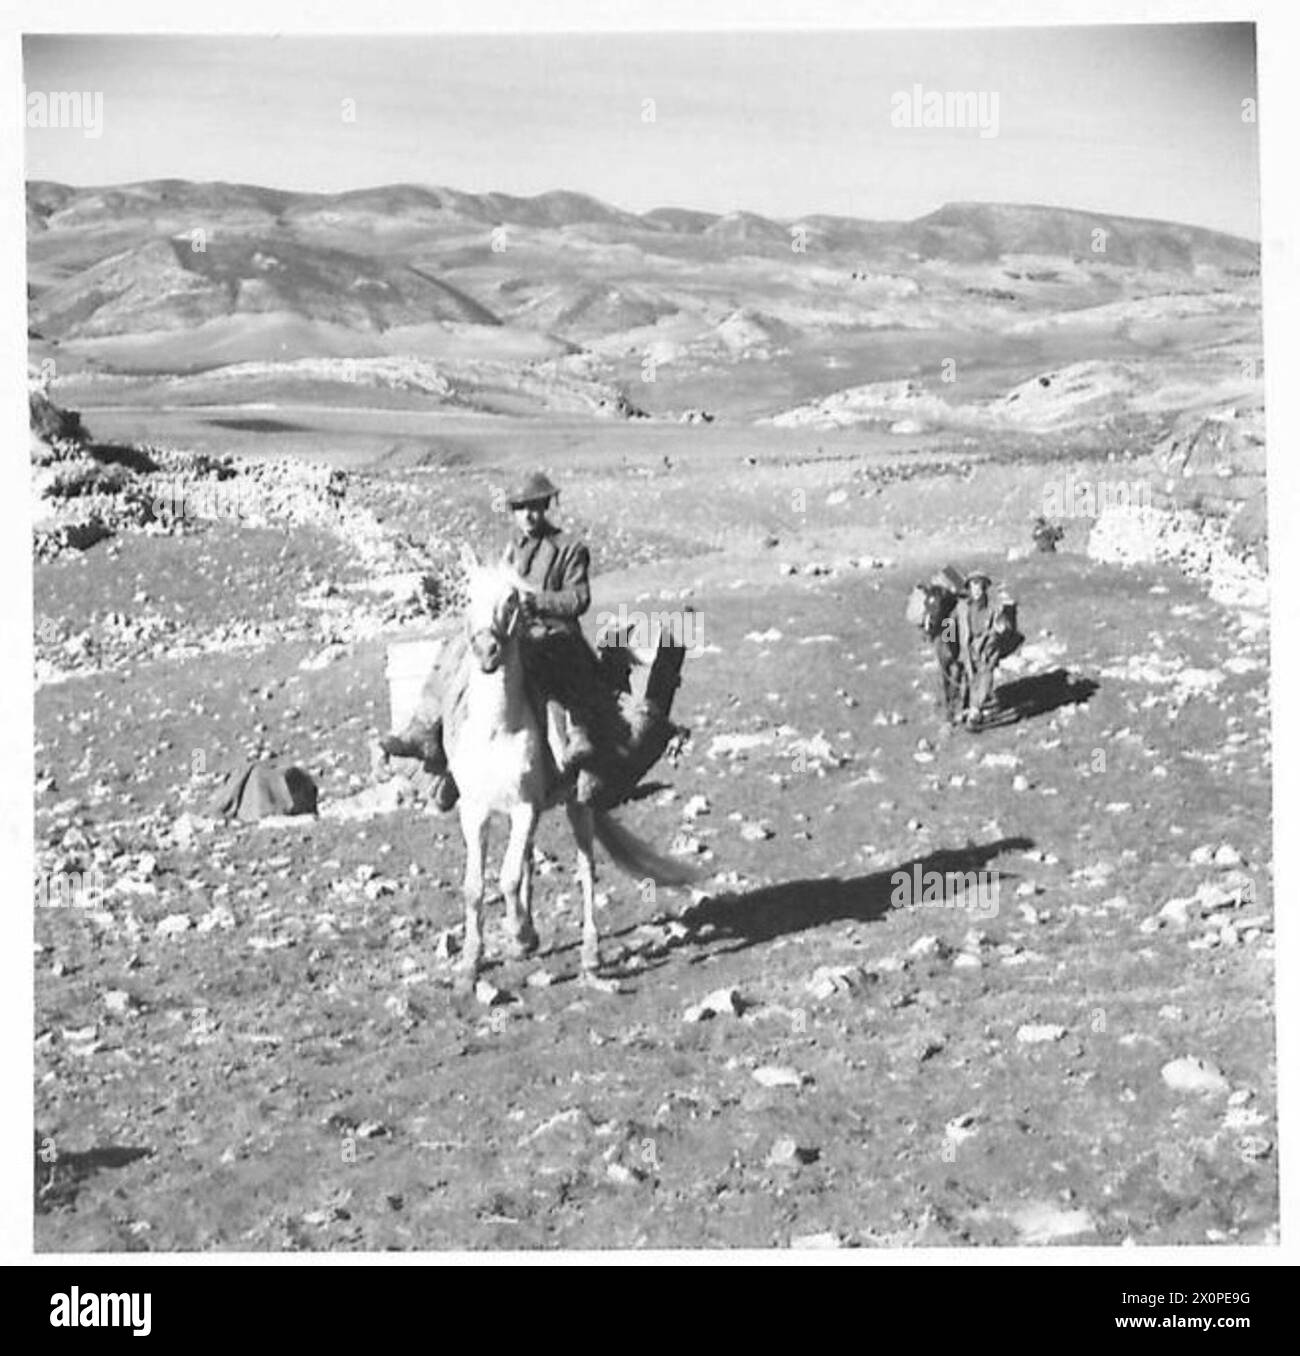 THE BRITISH ARMY IN THE TUNISIA CAMPAIGN, NOVEMBER 1942-MAY 1943 - Fusilier Robinson (of Lincoln) and Fusilier Bebb (of Bury) of the 2nd Battalion, Lancashire Fusiliers (11th Infantry Brigade, 78th Division) leading pack mules up the hillside near Sidi Nsir, 2 January 1943 British Army, British Army, 1st Army, British Army, 78th Infantry Division, British Army, Lancashire Fusiliers, British Army, Lancashire Fusiliers, Bn, 2 Stock Photo